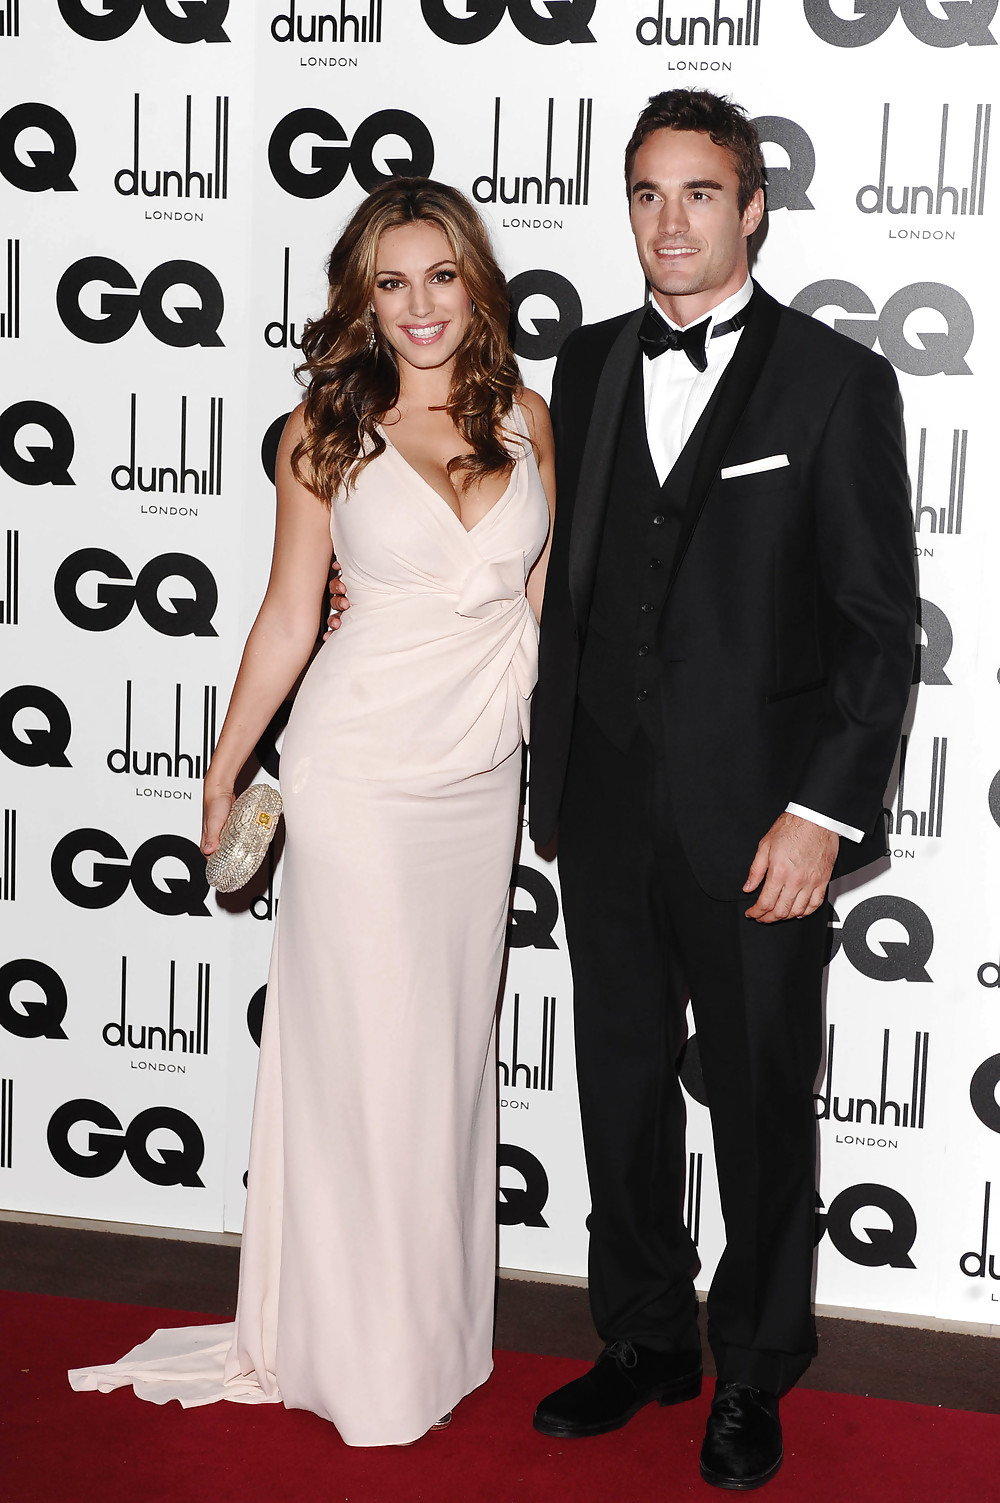 Kelly Brook 2011 GQ Men of the Year Awards in London #7536262